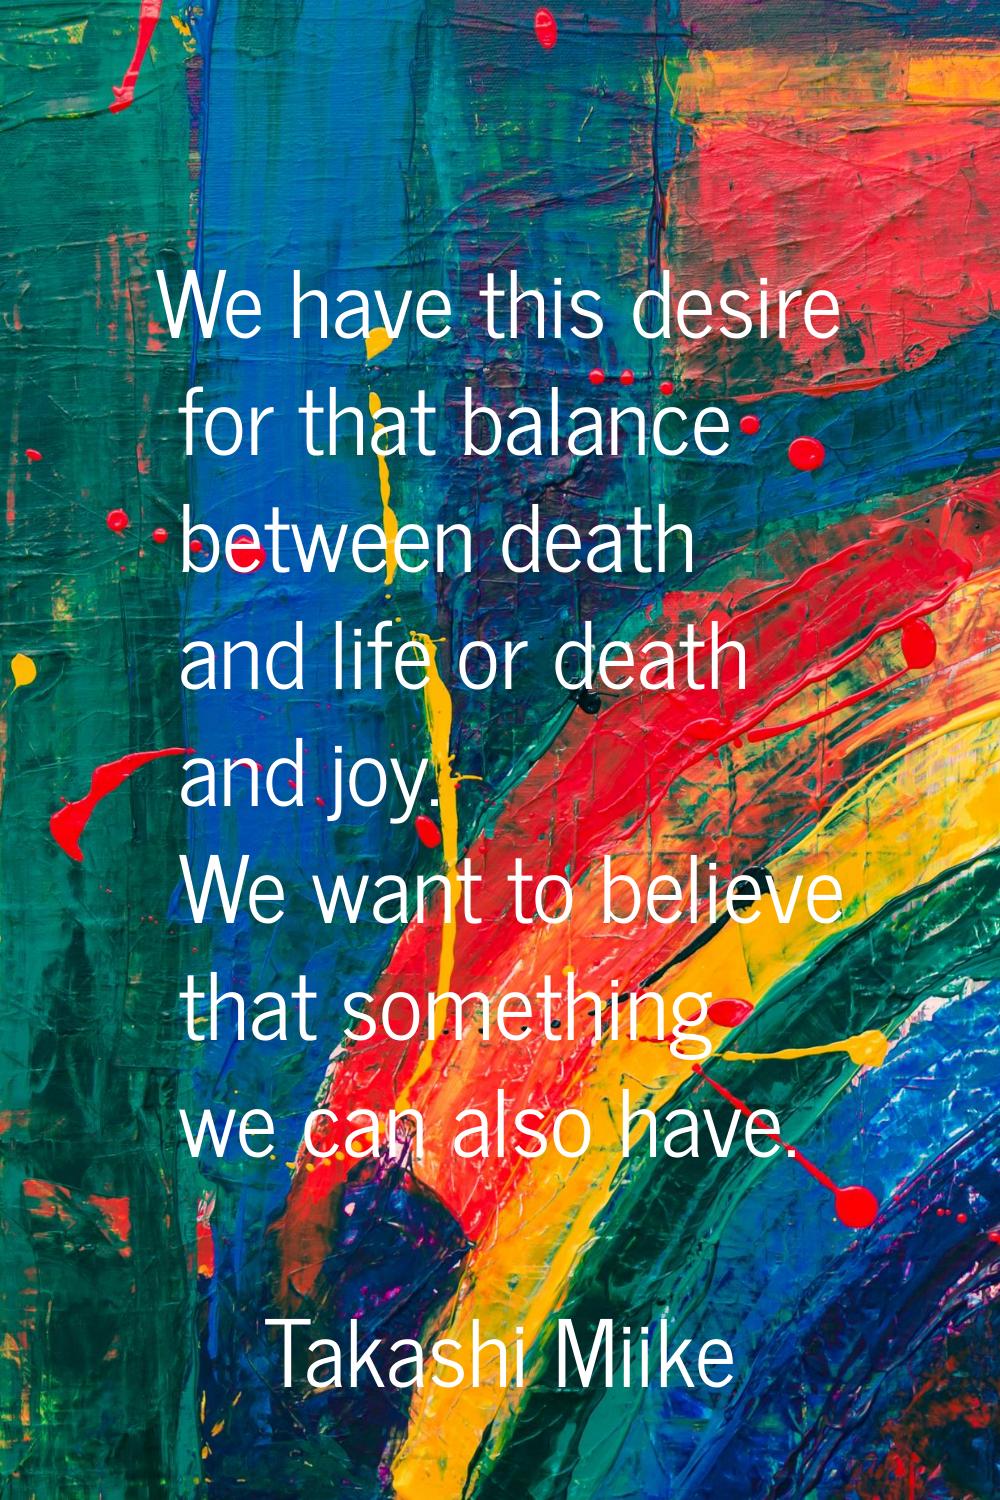 We have this desire for that balance between death and life or death and joy. We want to believe th